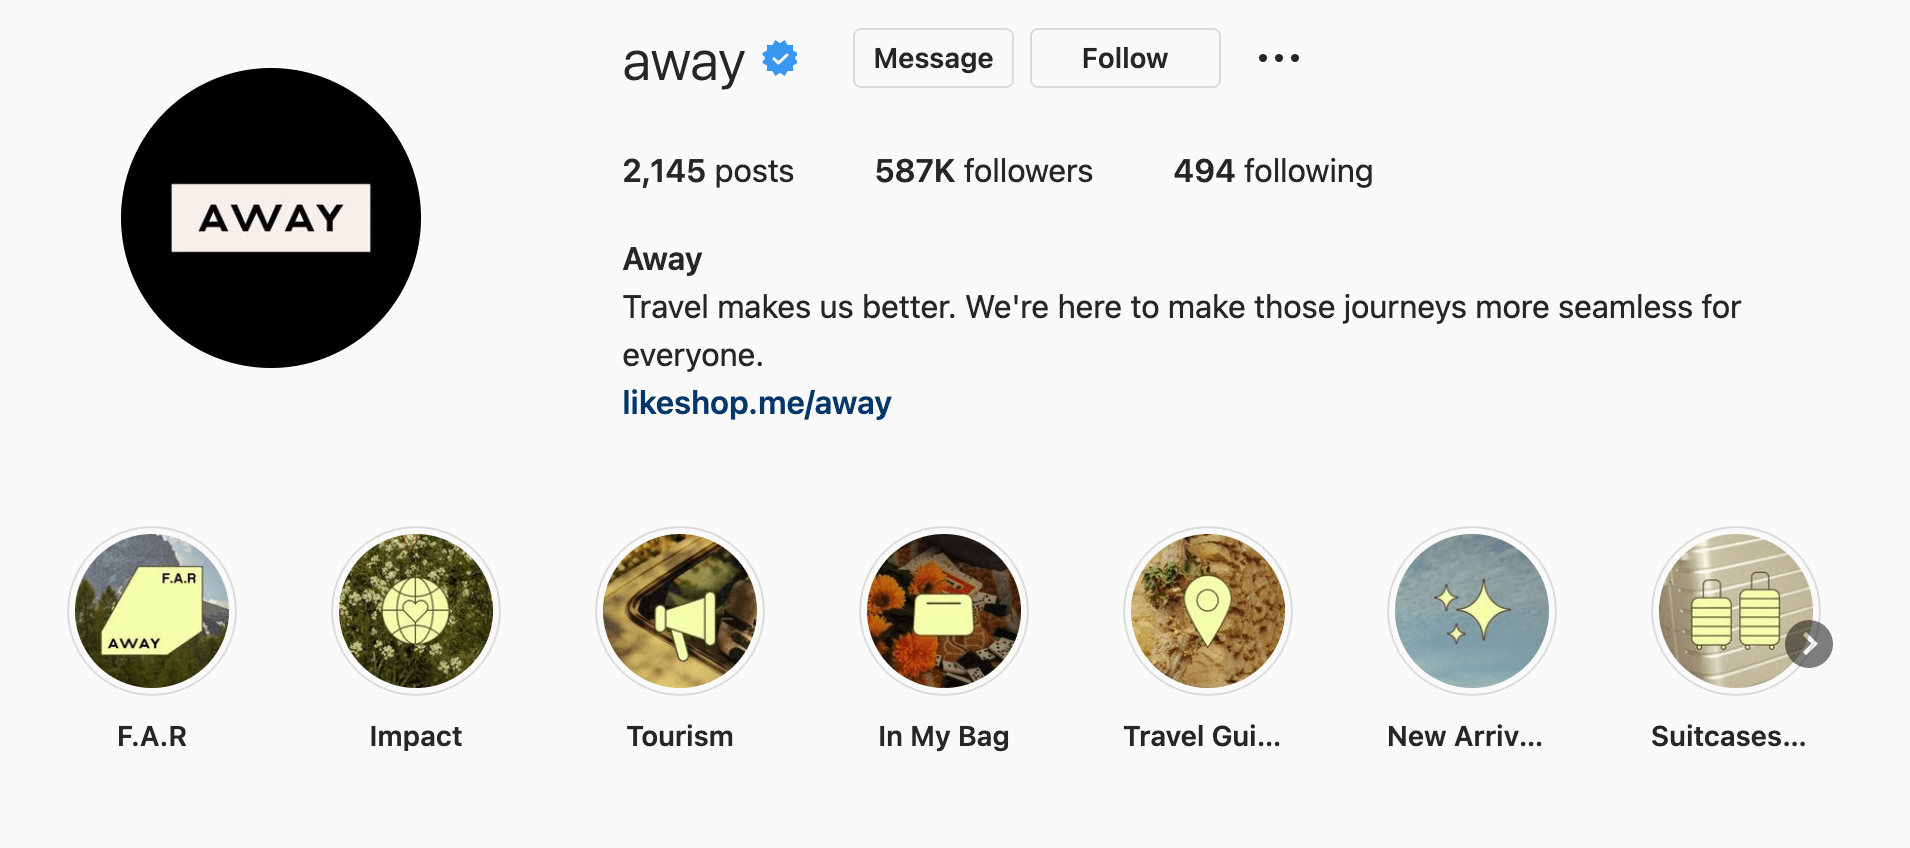 away instagram page with icons for various highlights of luggage brand